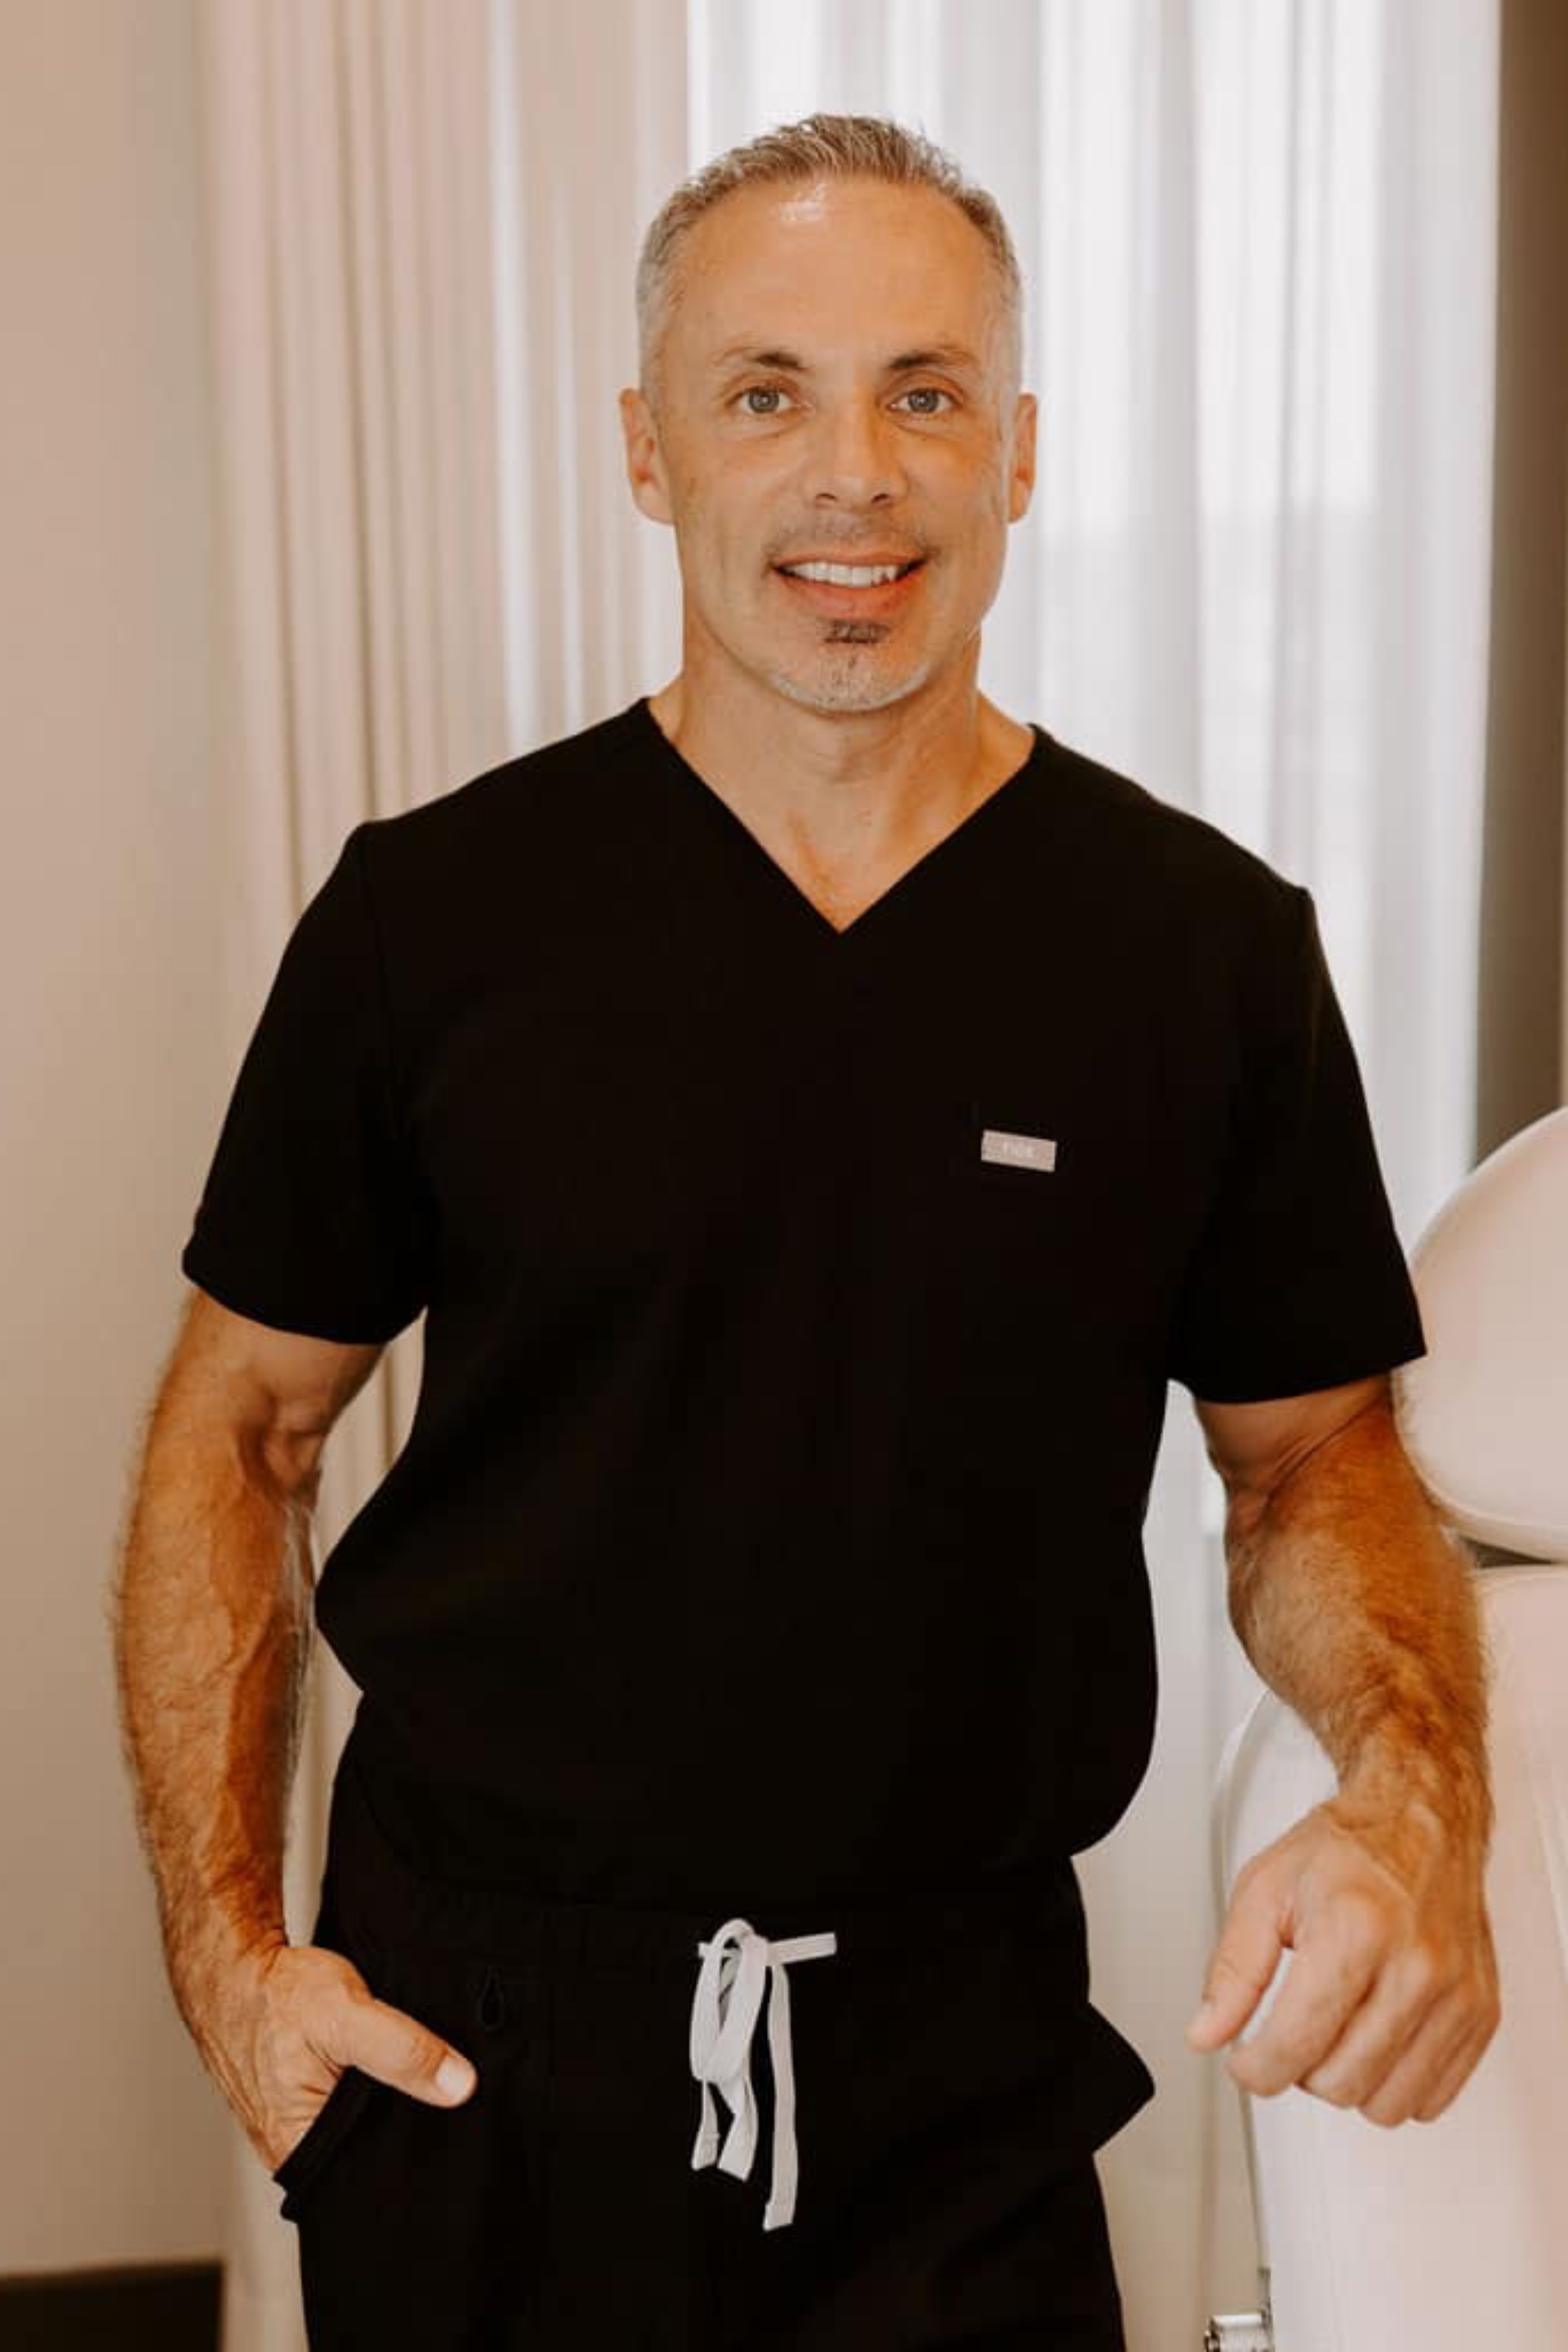 Profile image of Dr. Todd Hold, Medical Director at Curate MedAesthetics